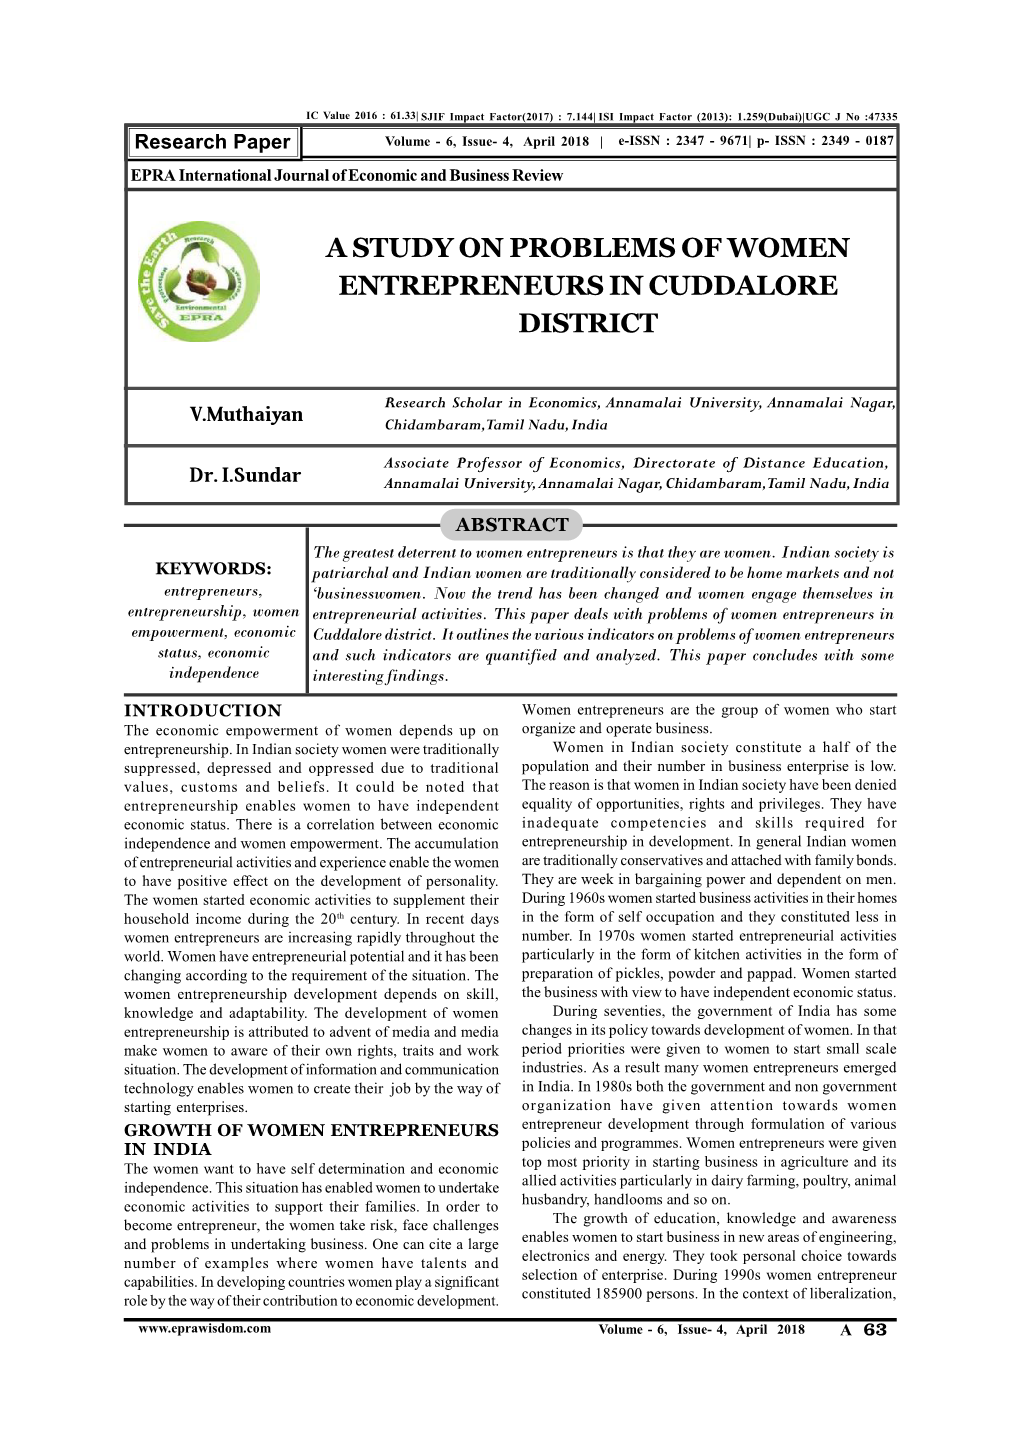 A Study on Problems of Women Entrepreneurs in Cuddalore District